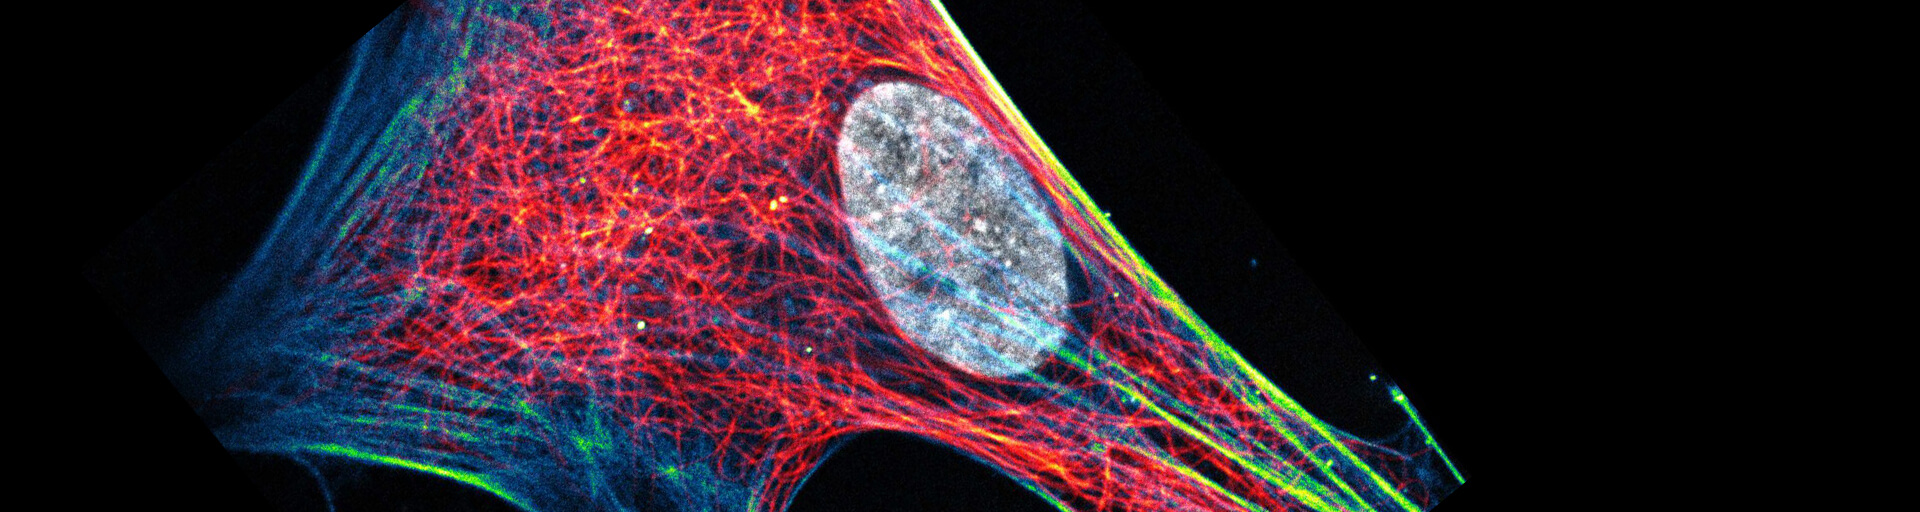 Composite of three color live-cell image of an adherent mammalian cell. This living cell was directly labelled with abberior LIVE 510 actin (blue/green), LIVE 560 DNA (gray) and LIVE 610 tubulin.